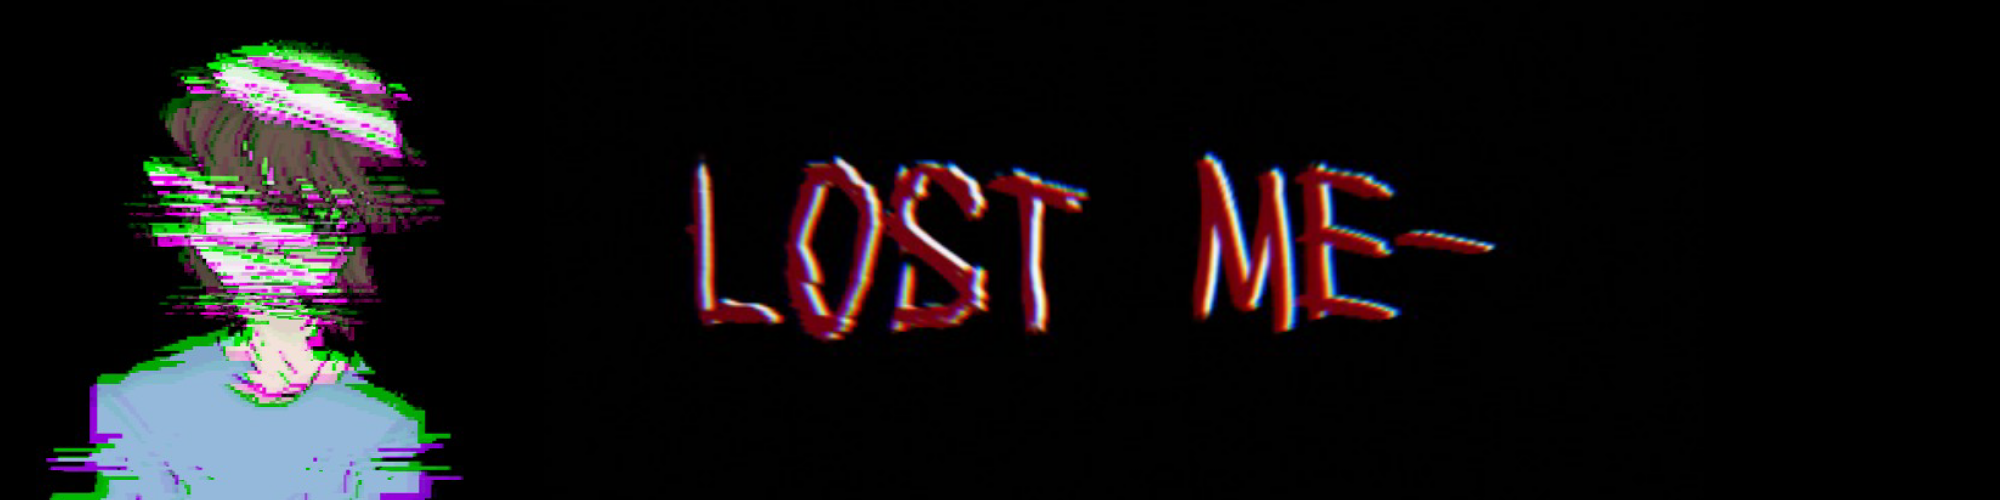 Lost Me-